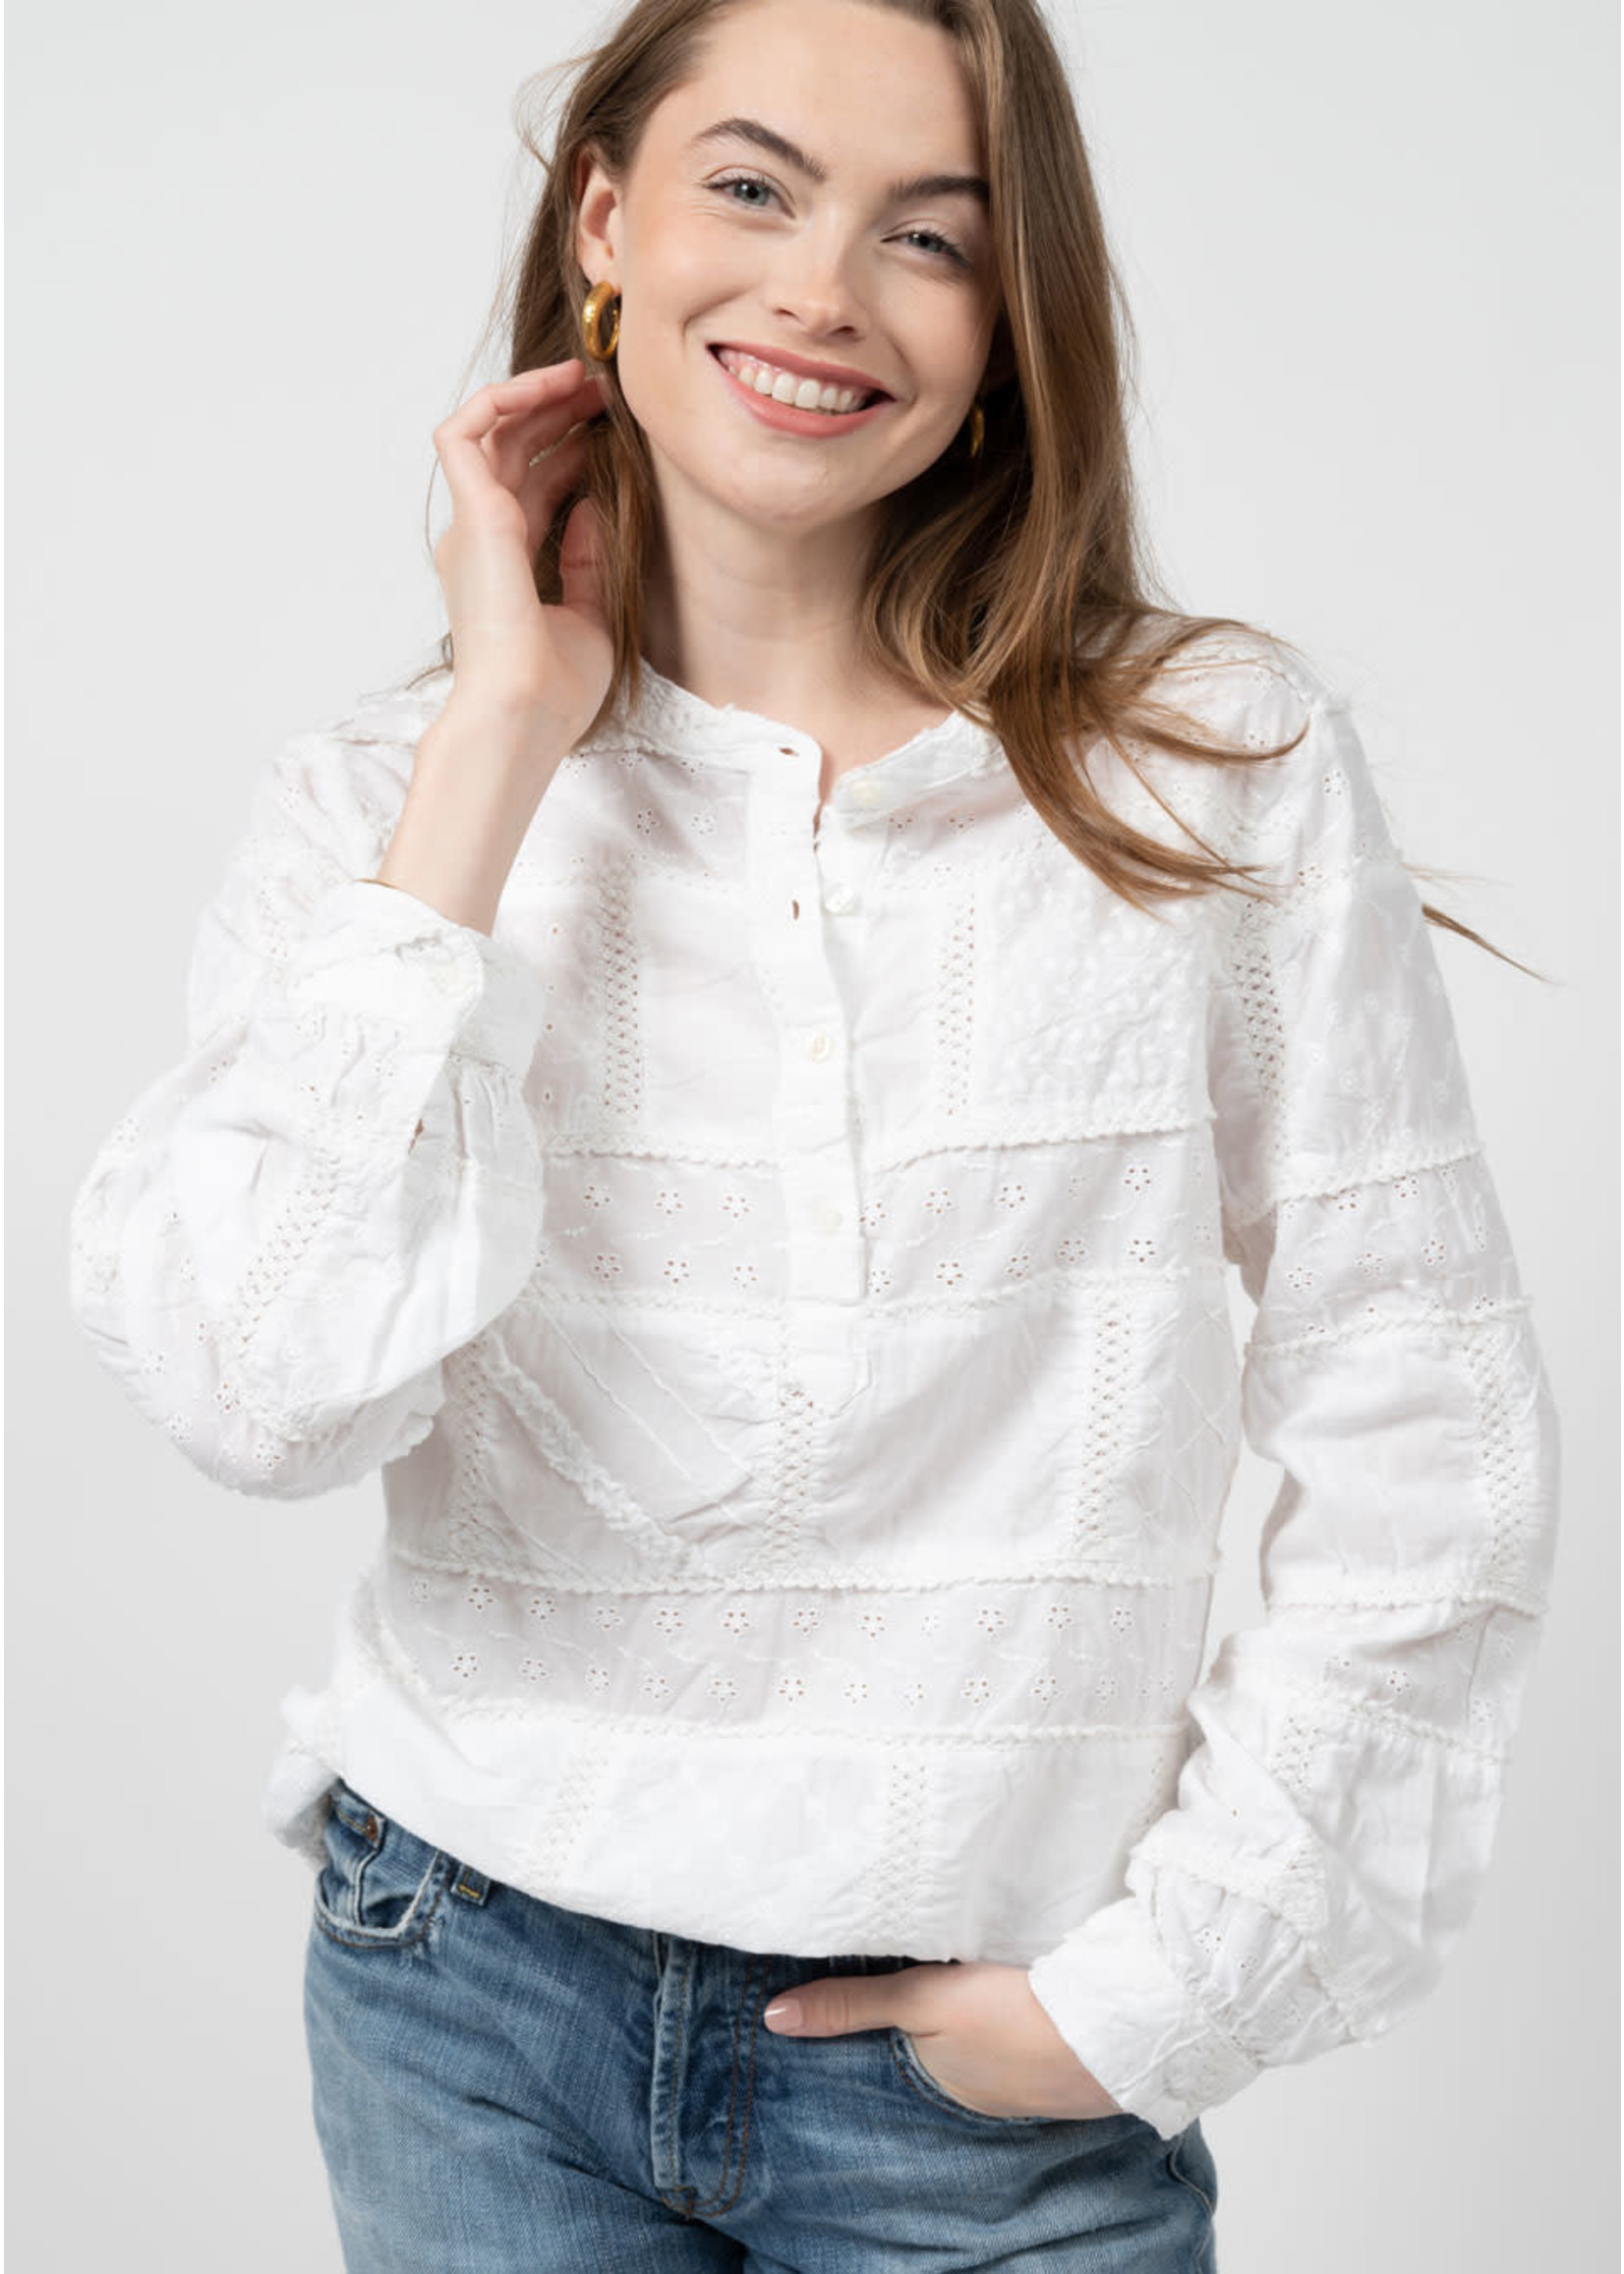 Ivy Jane Patched Eyelet Top